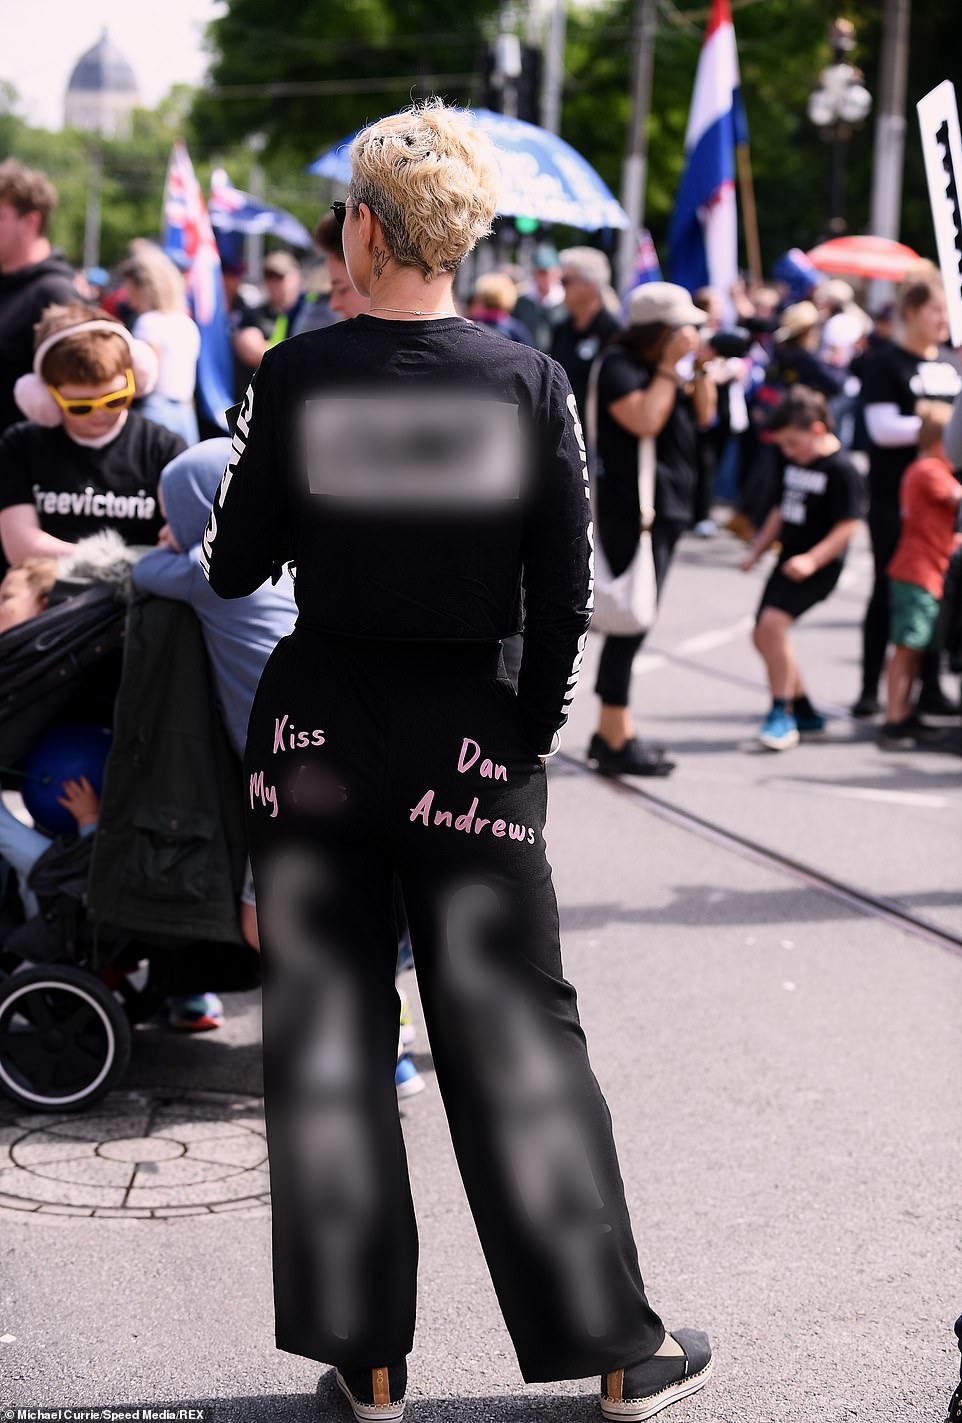 A protester was dressed in an outfit riddled with expletives reading 'Kiss my a** Dan Andrews' and 'C***t' written head to toe